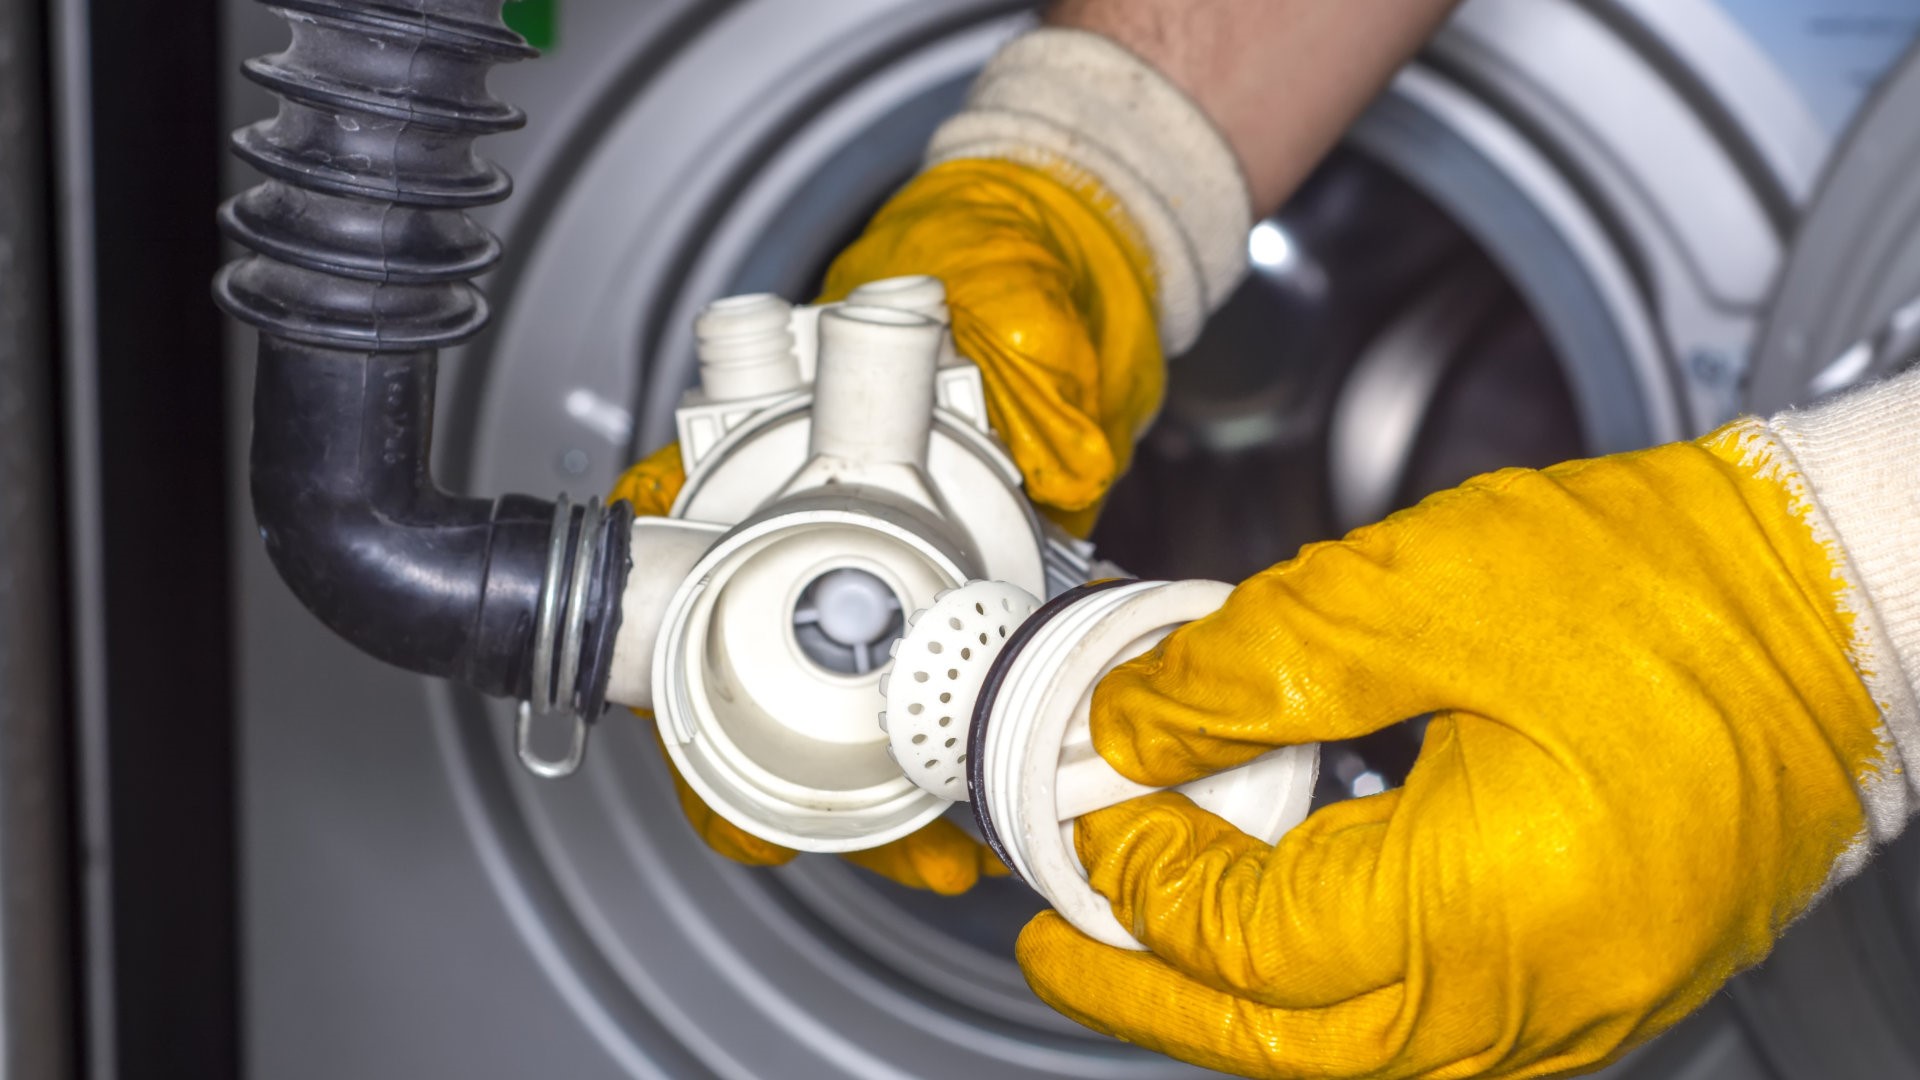 How To Unclog A Washer Drain